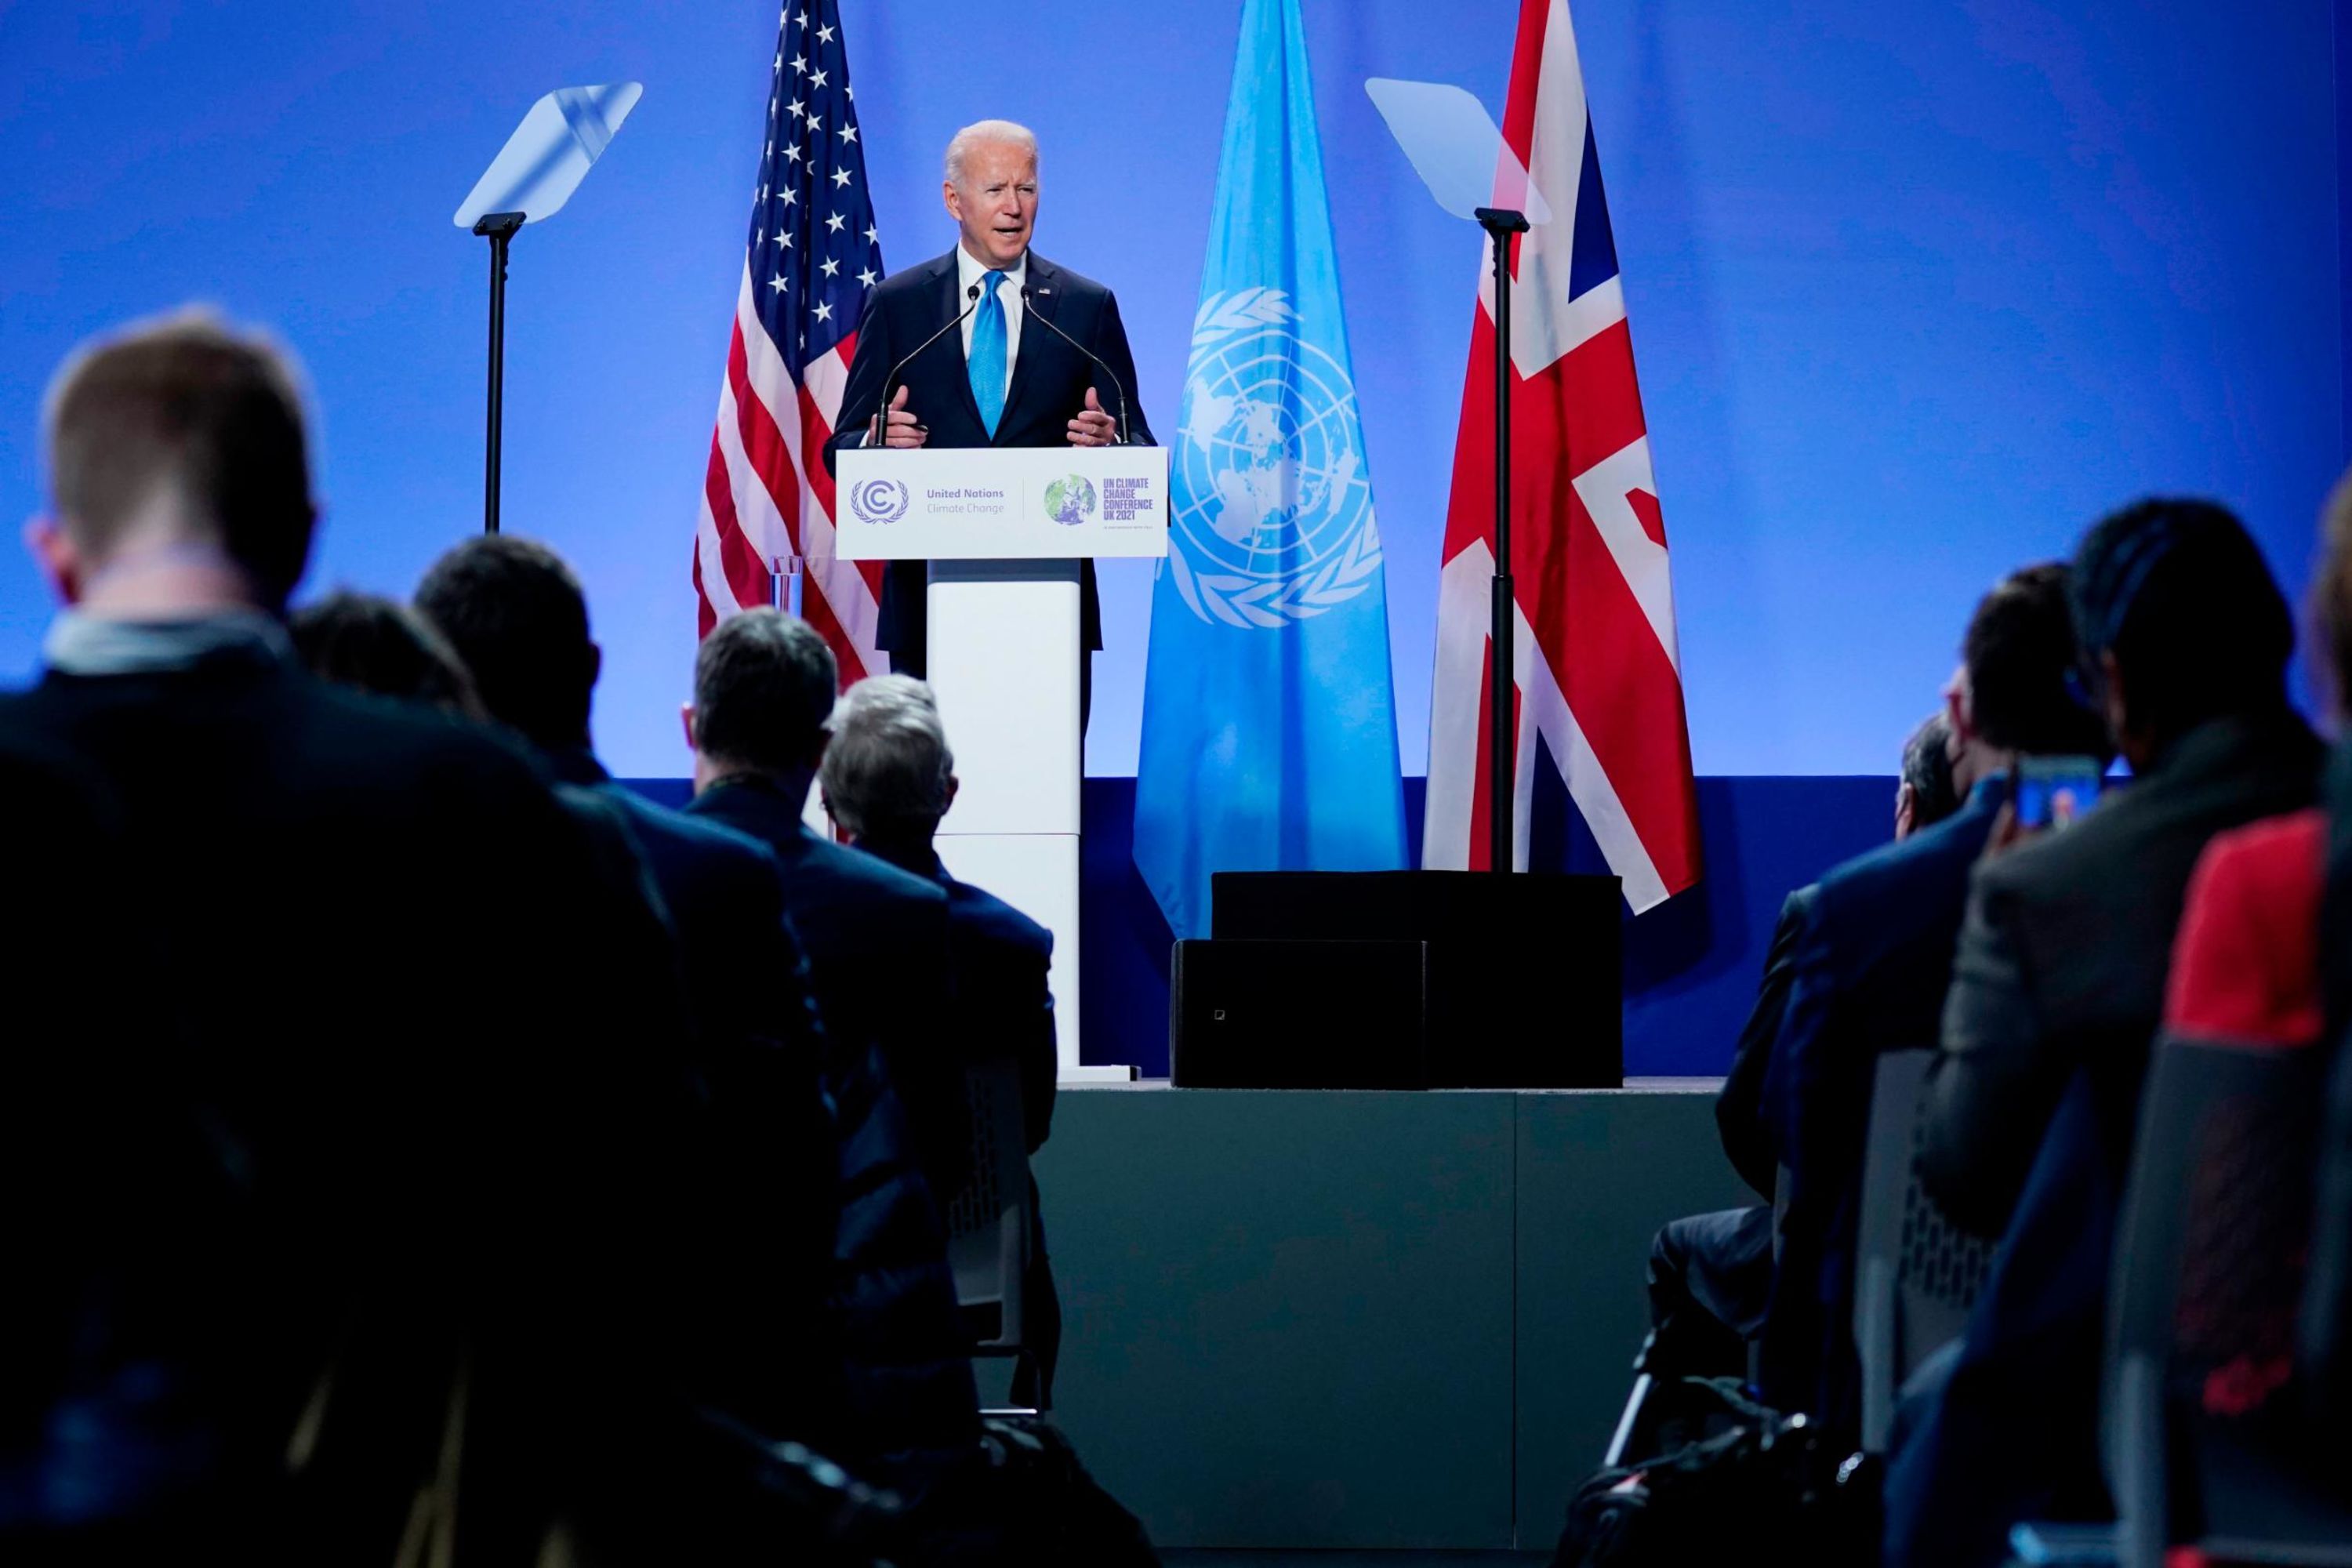 US President Joe Biden speaks during a news conference at COP26, a climate change summit in Glasgow, Scotland, on Tuesday, November 2.